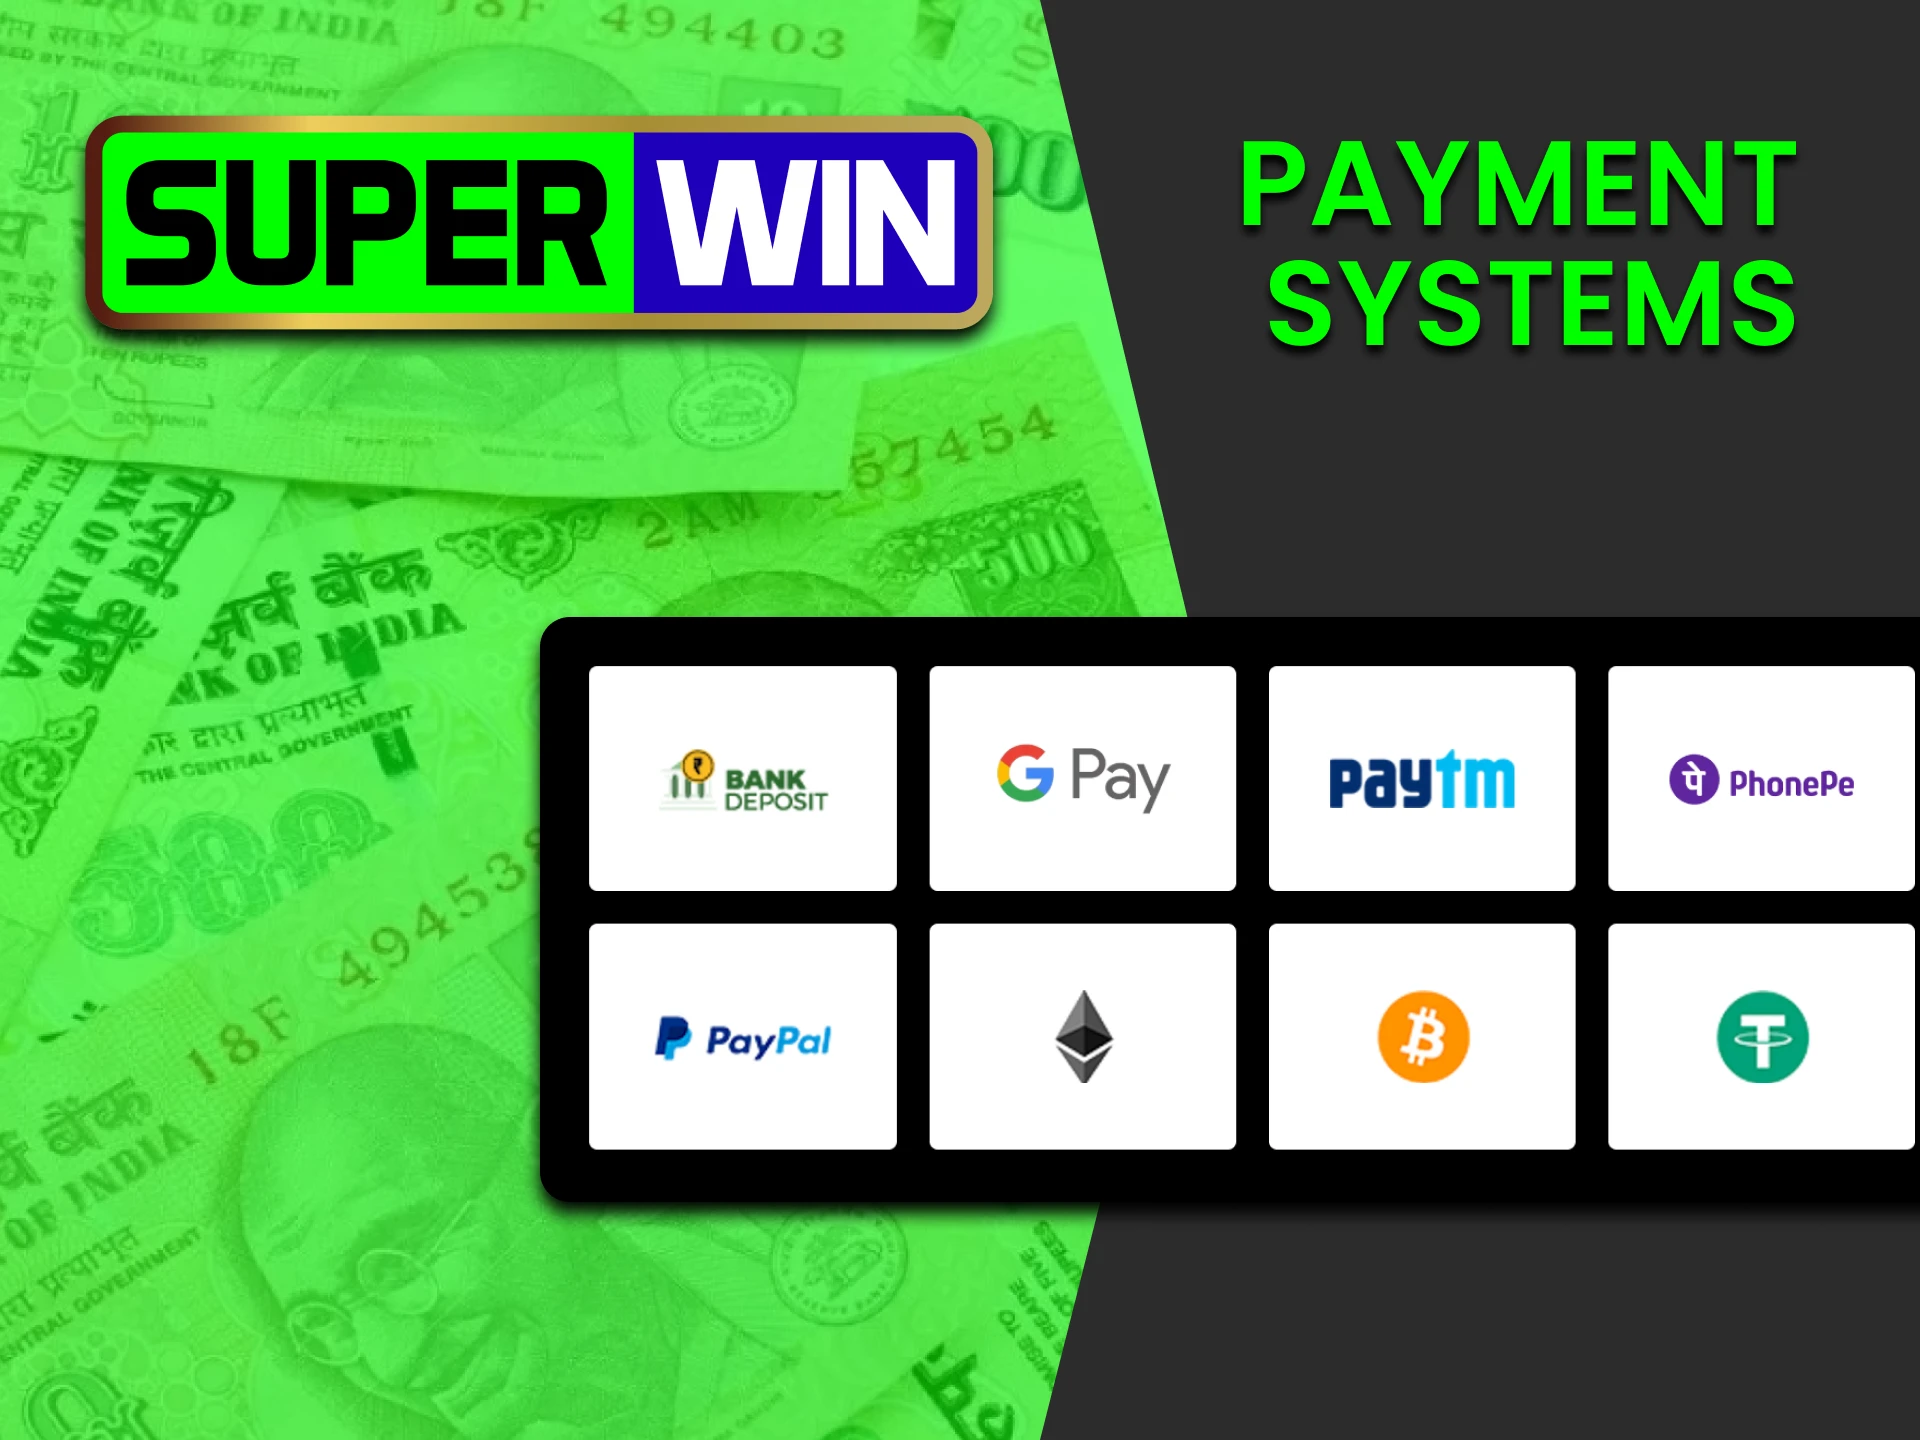 Find out what payment systems are available on Superwin.